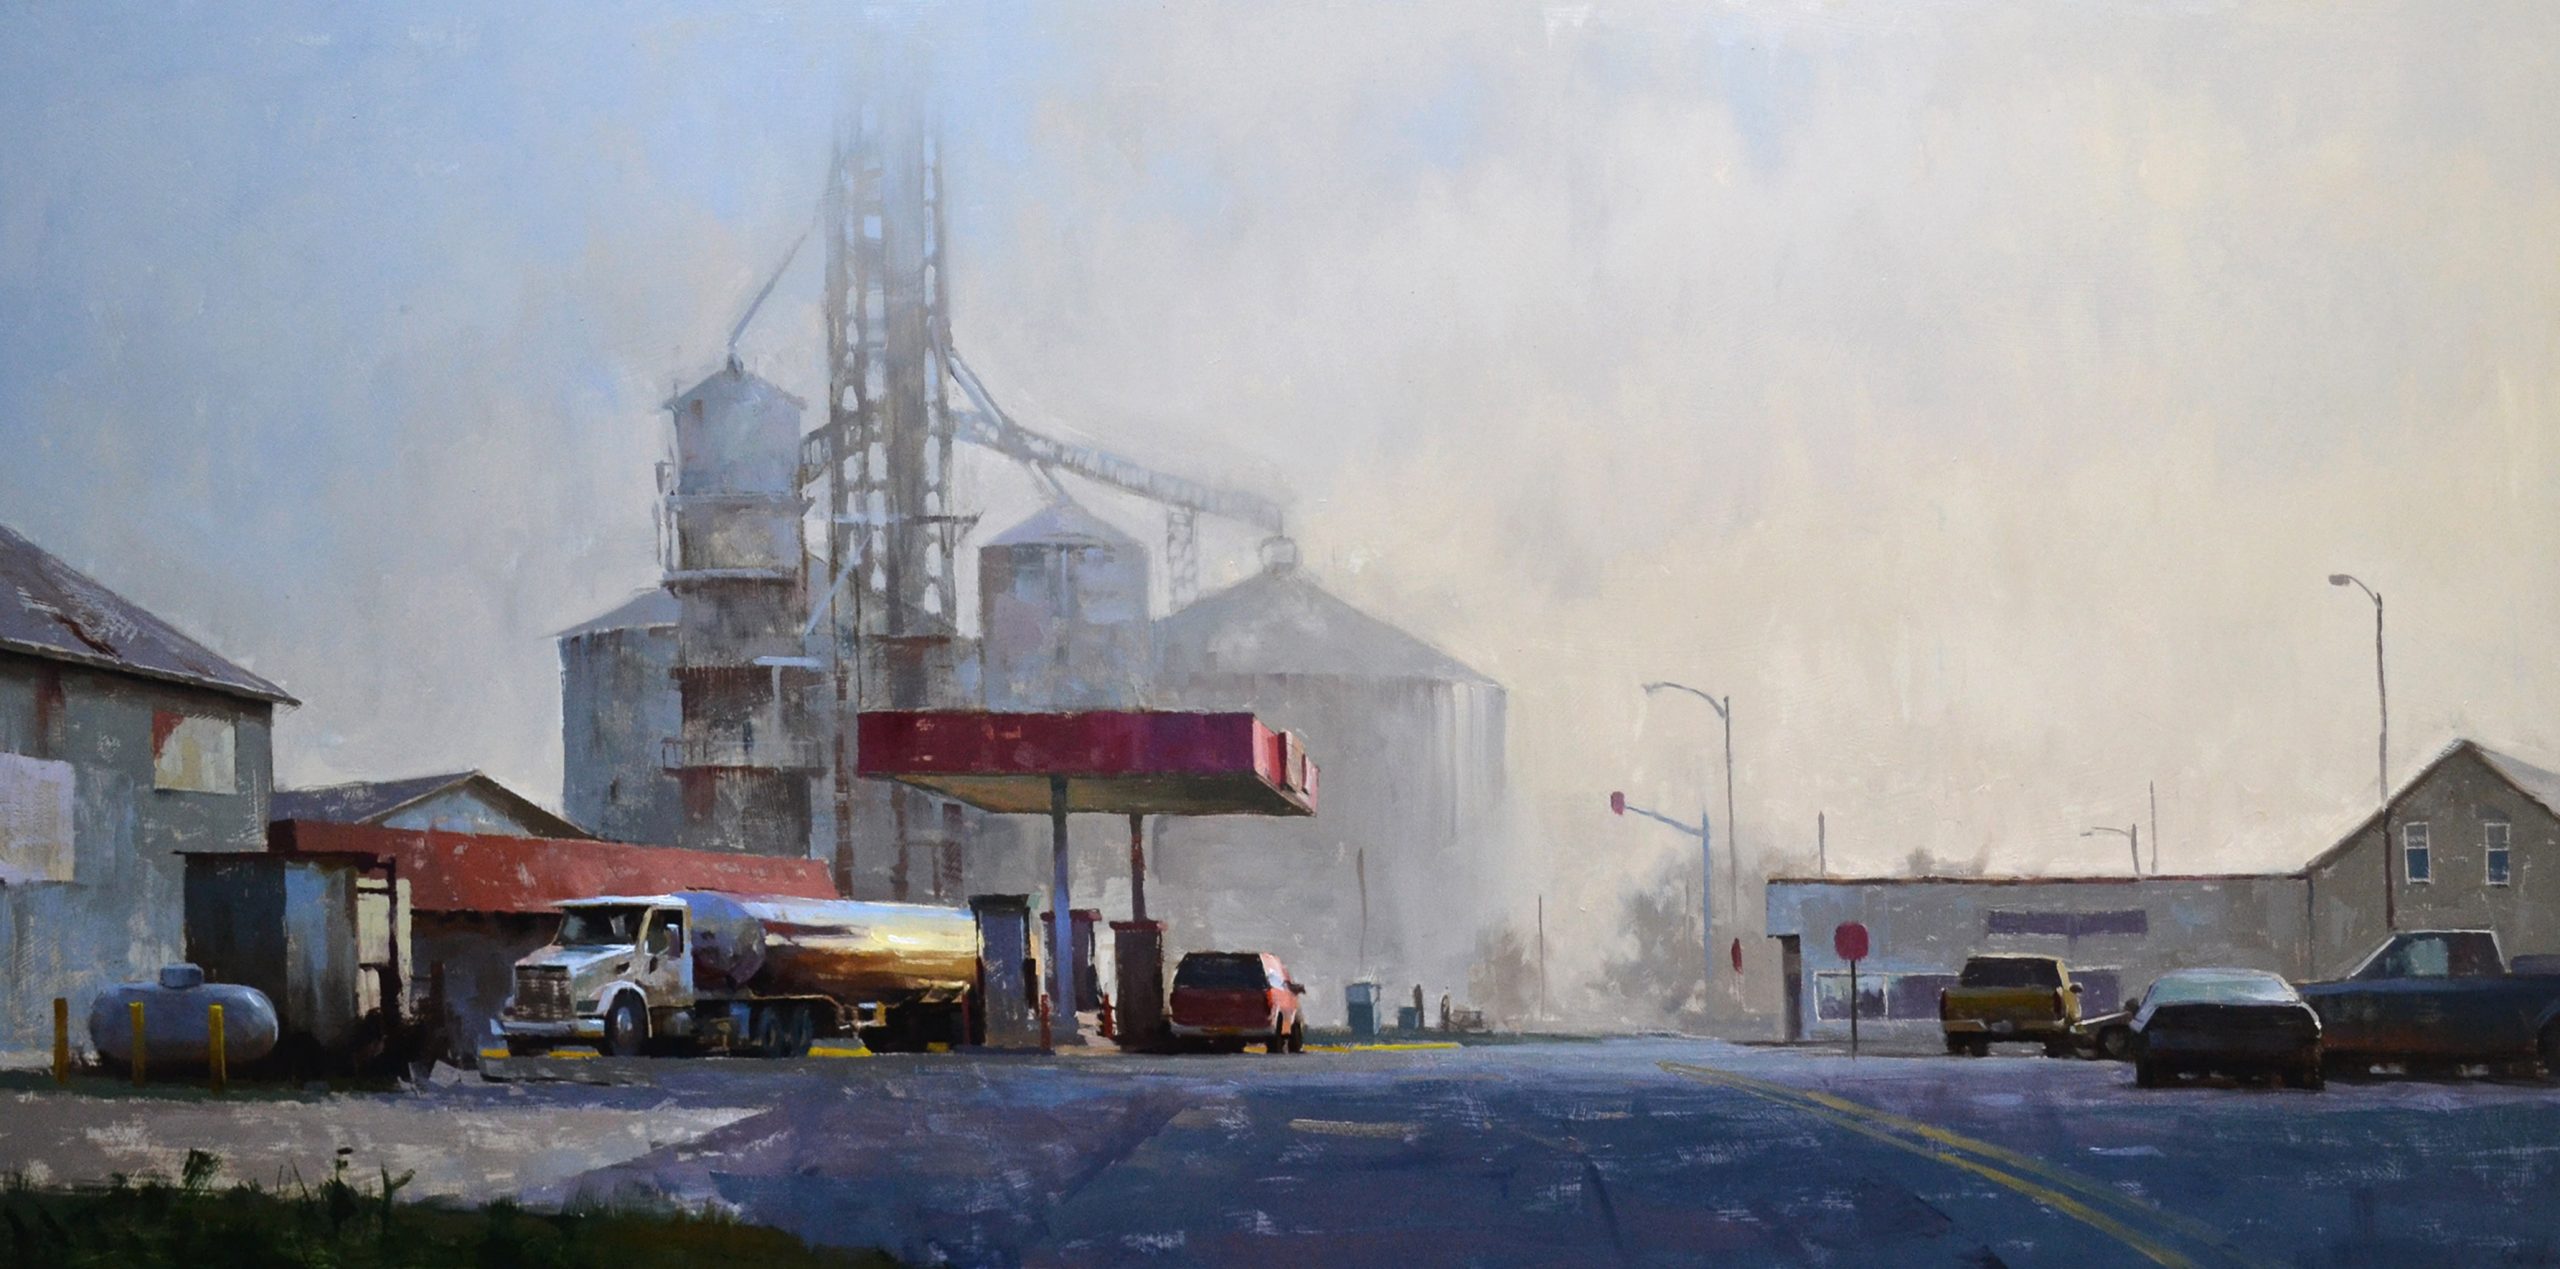 Marc Anderson-Giants of Little America-Oil painting-24x48